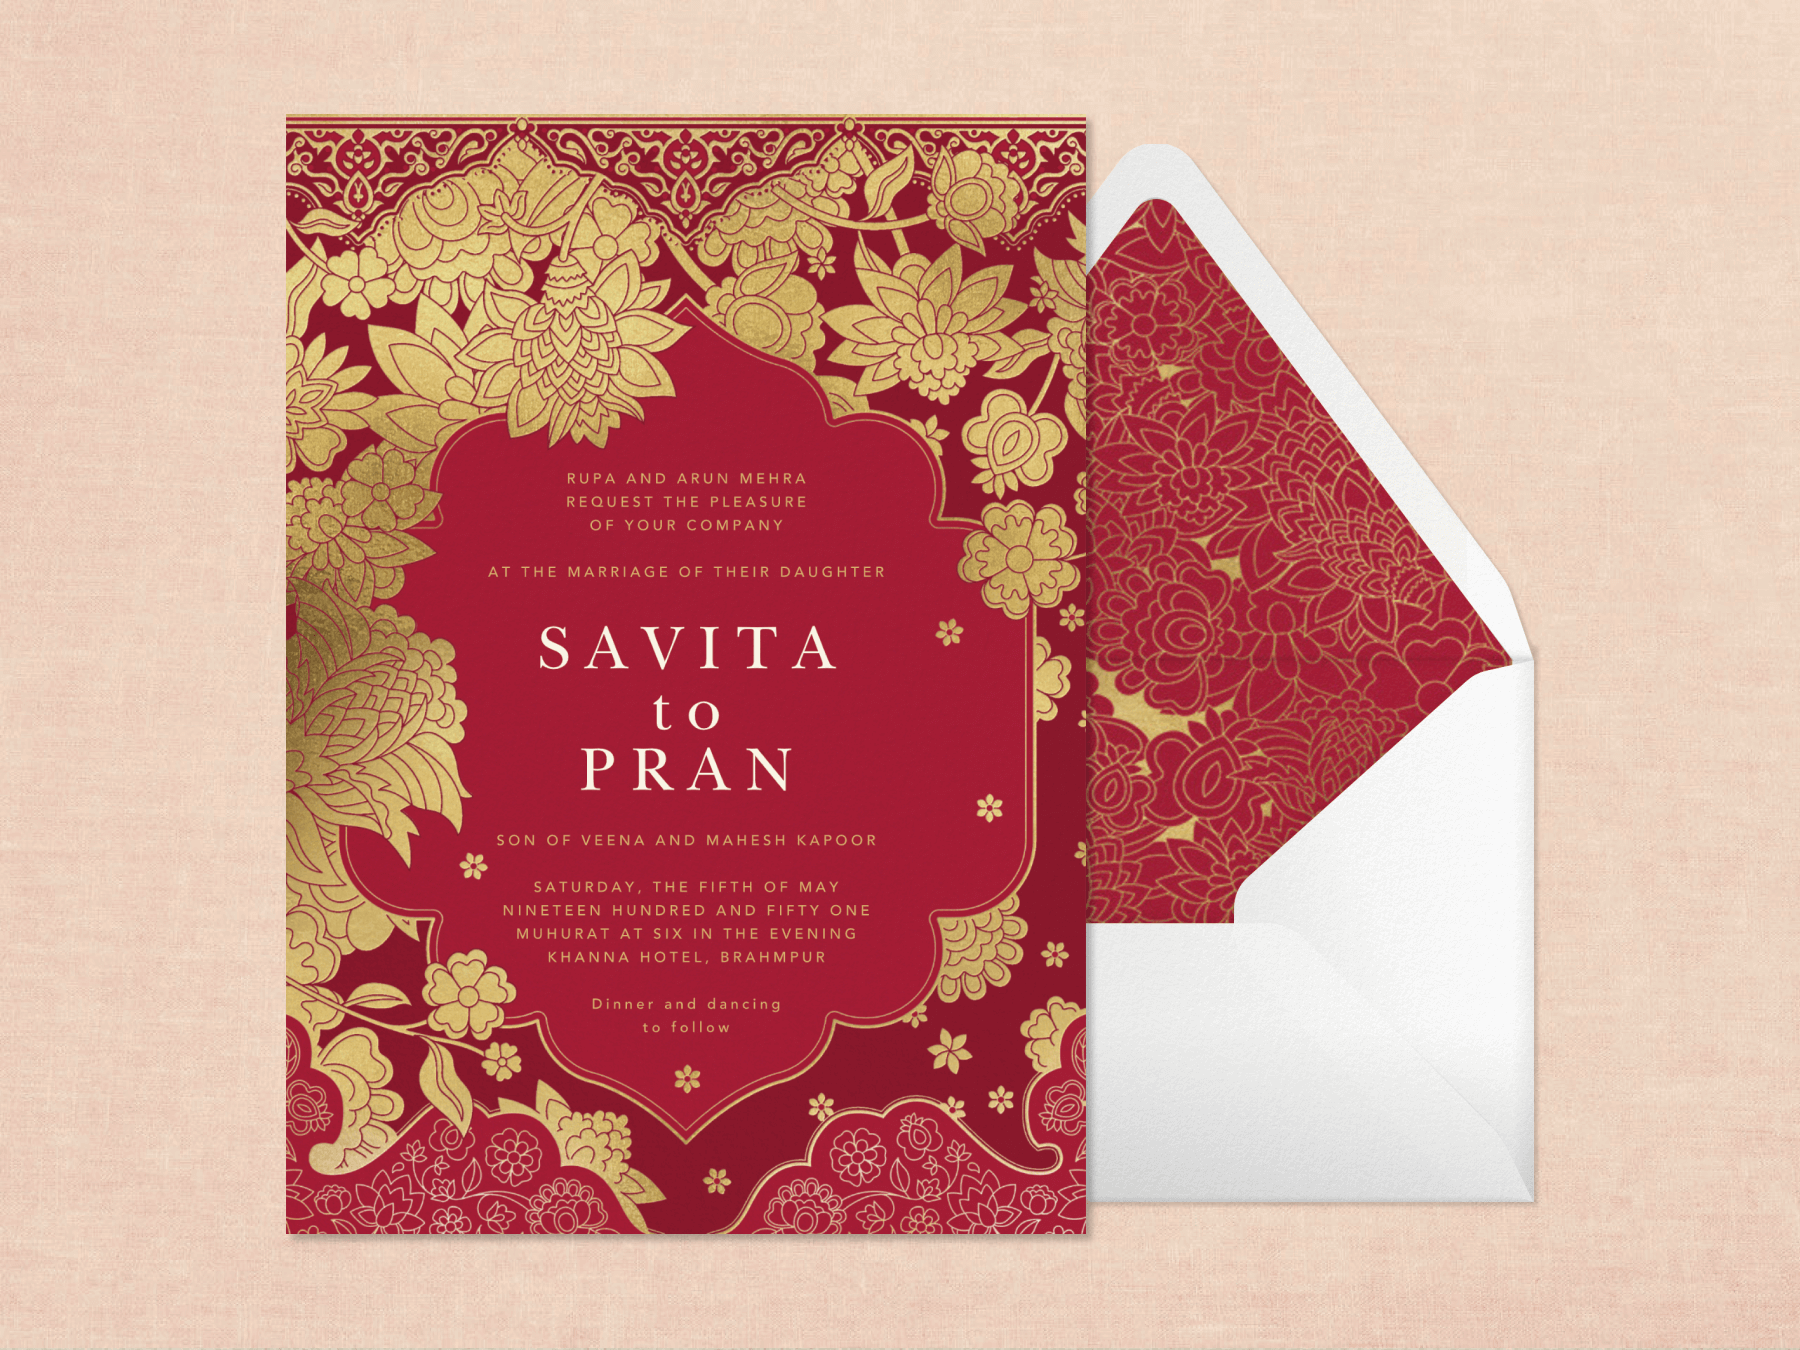 A maroon wedding invitation with Indian-style gold arabesque and floral border next to a white envelope with matching liner on a light pink textured background.